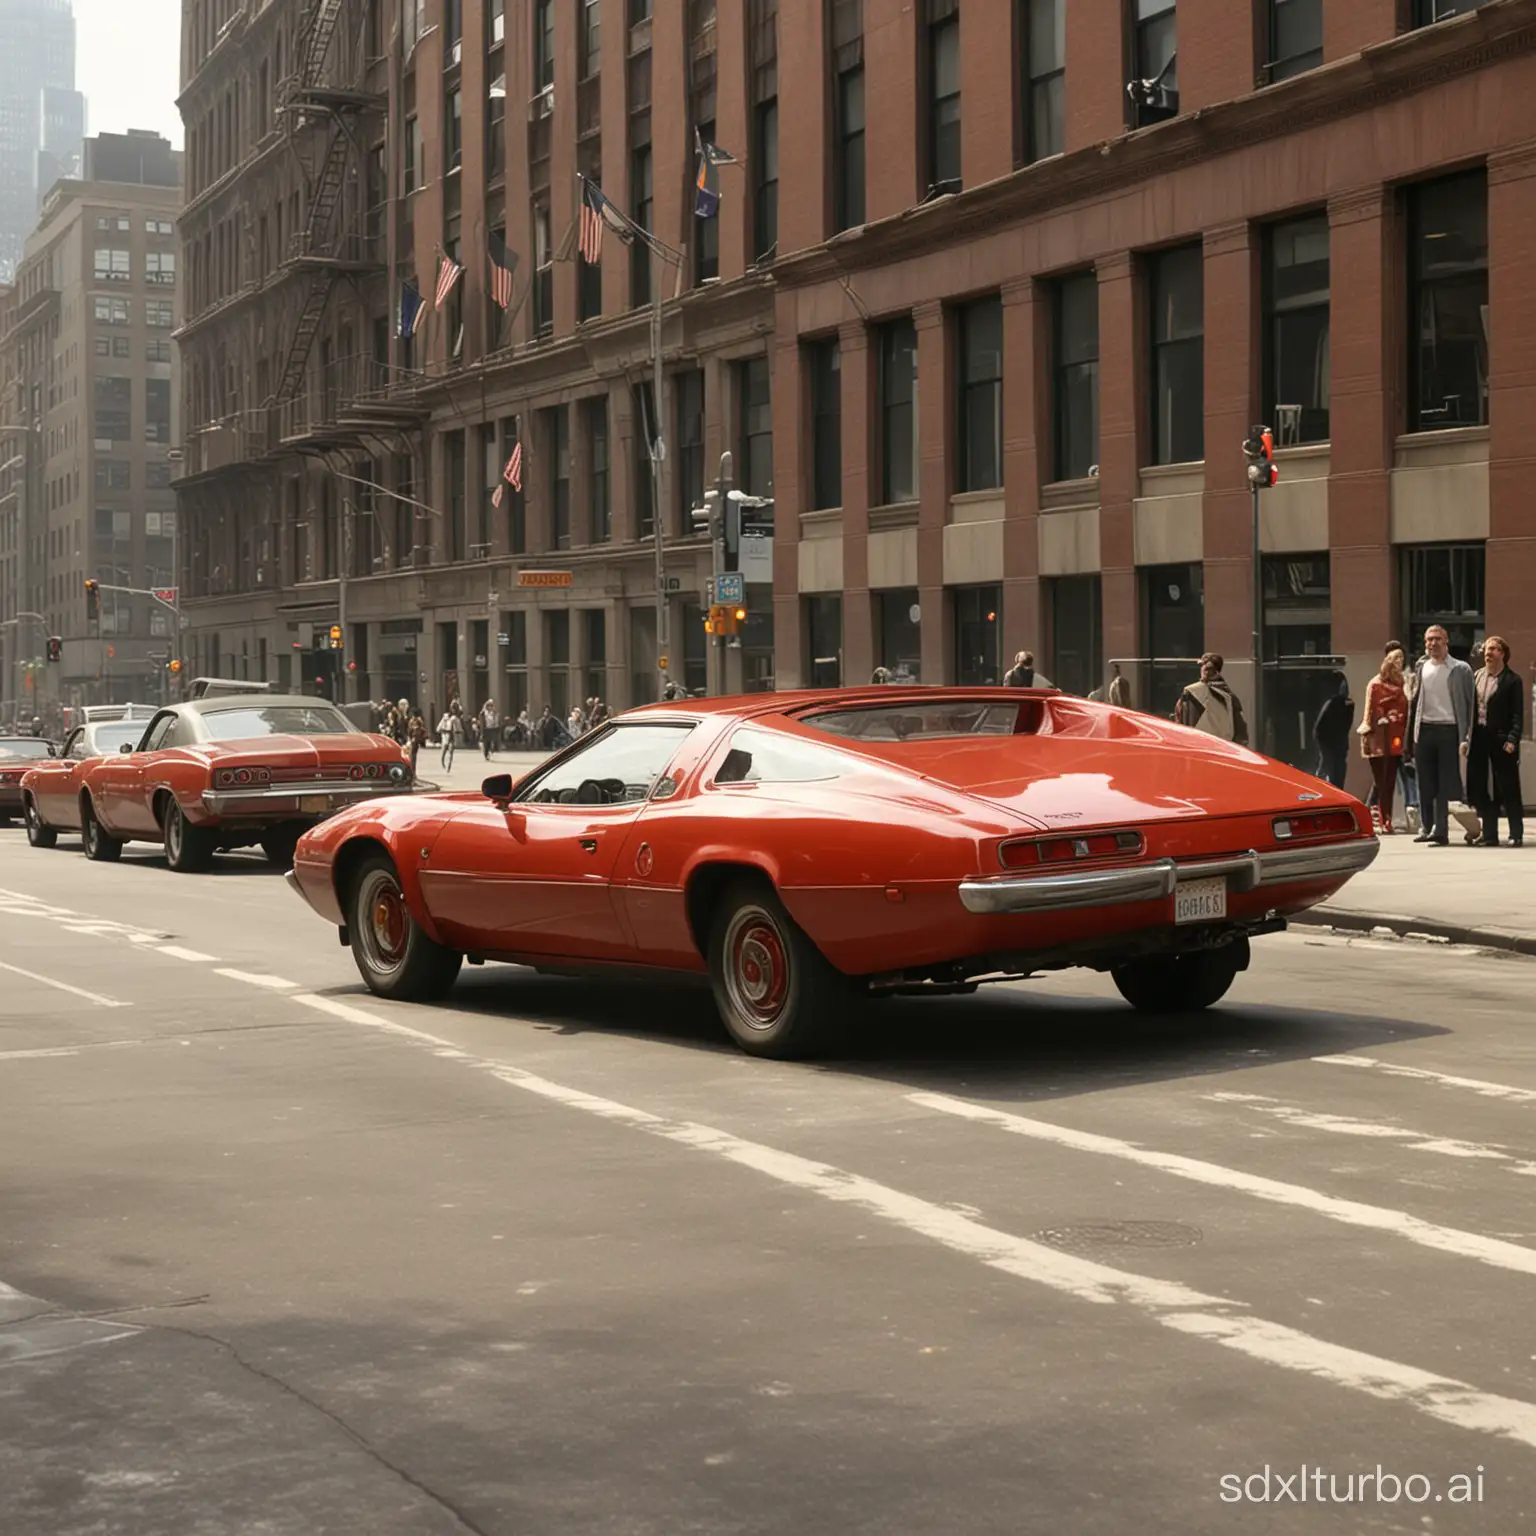 Vintage-Red-Car-Driving-Through-Bustling-New-York-City-Streets